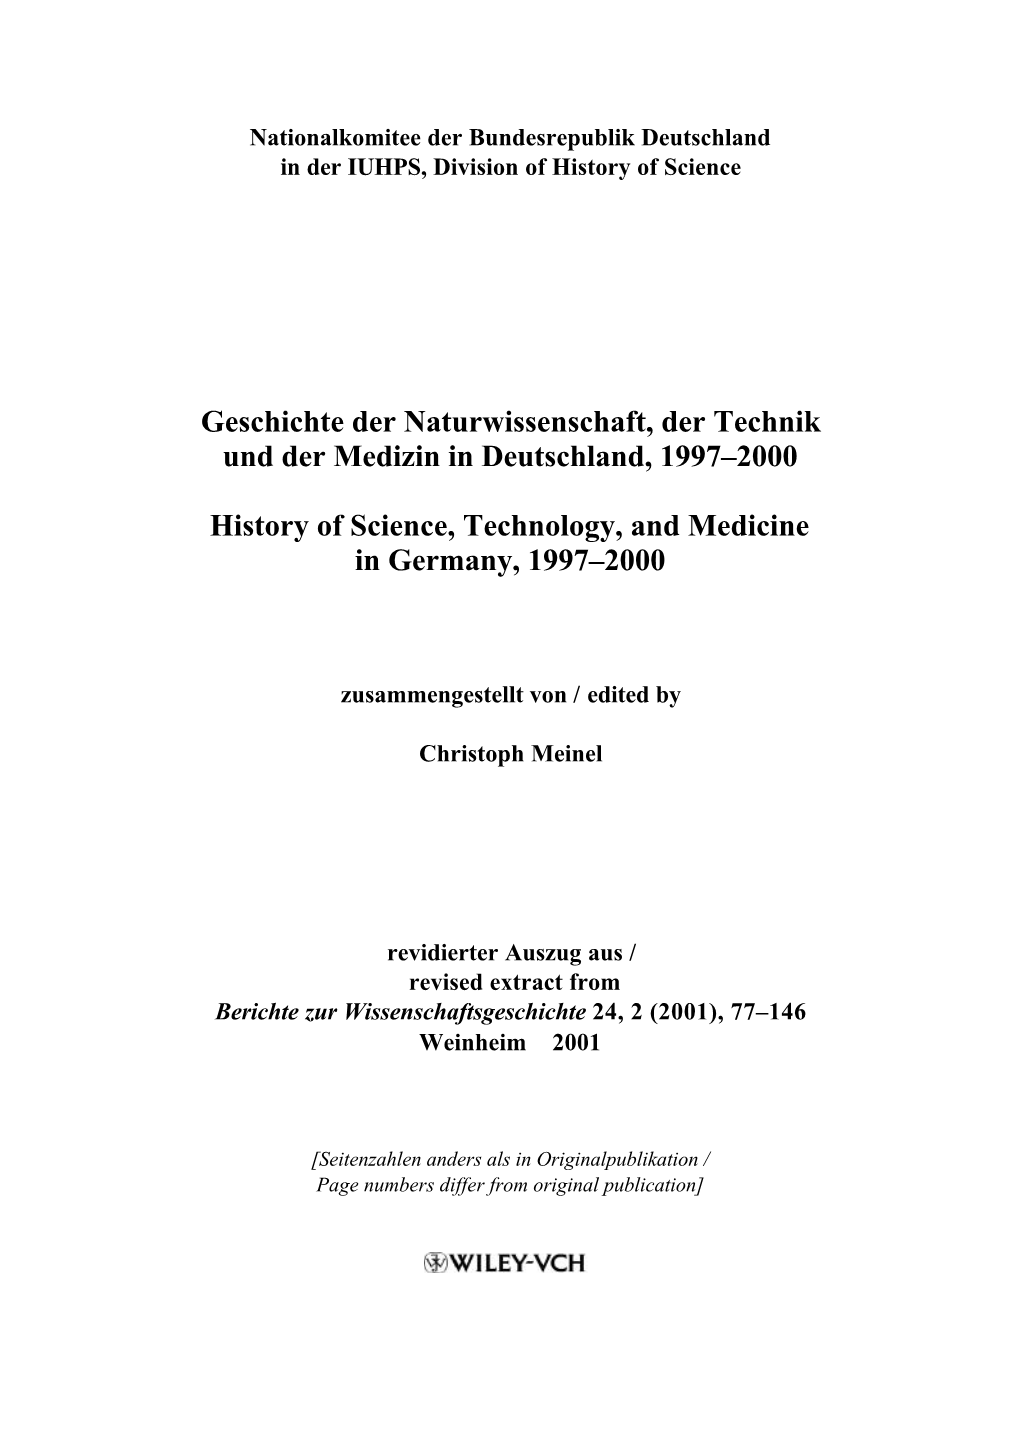 History of Science, Technology, and Medicine in Germany, 1997–2000